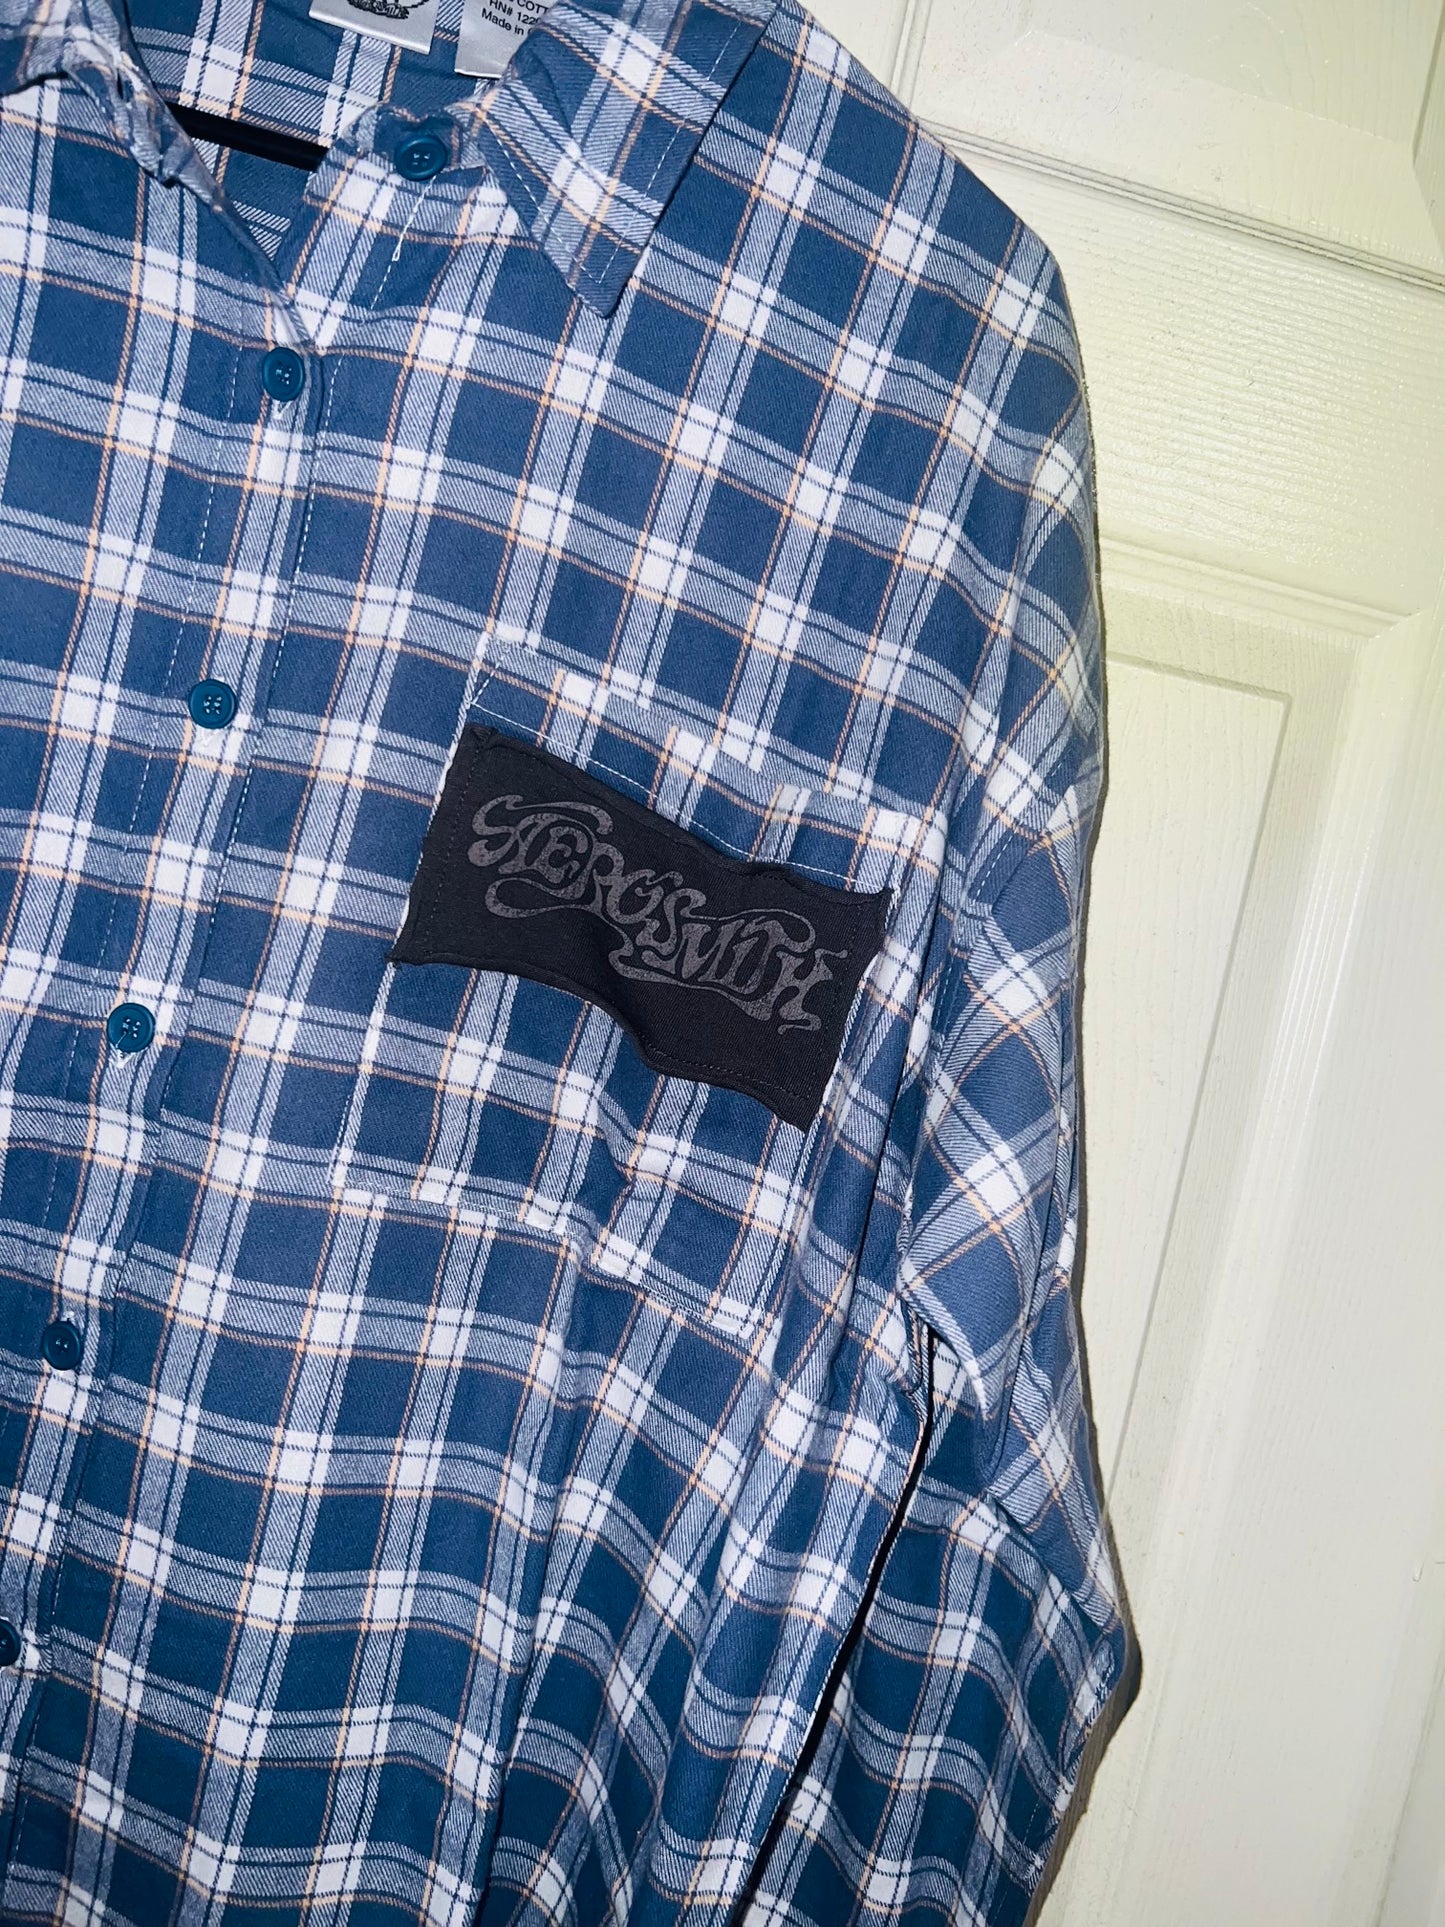 Aerosmith Oversized Flannel with a Backpatch